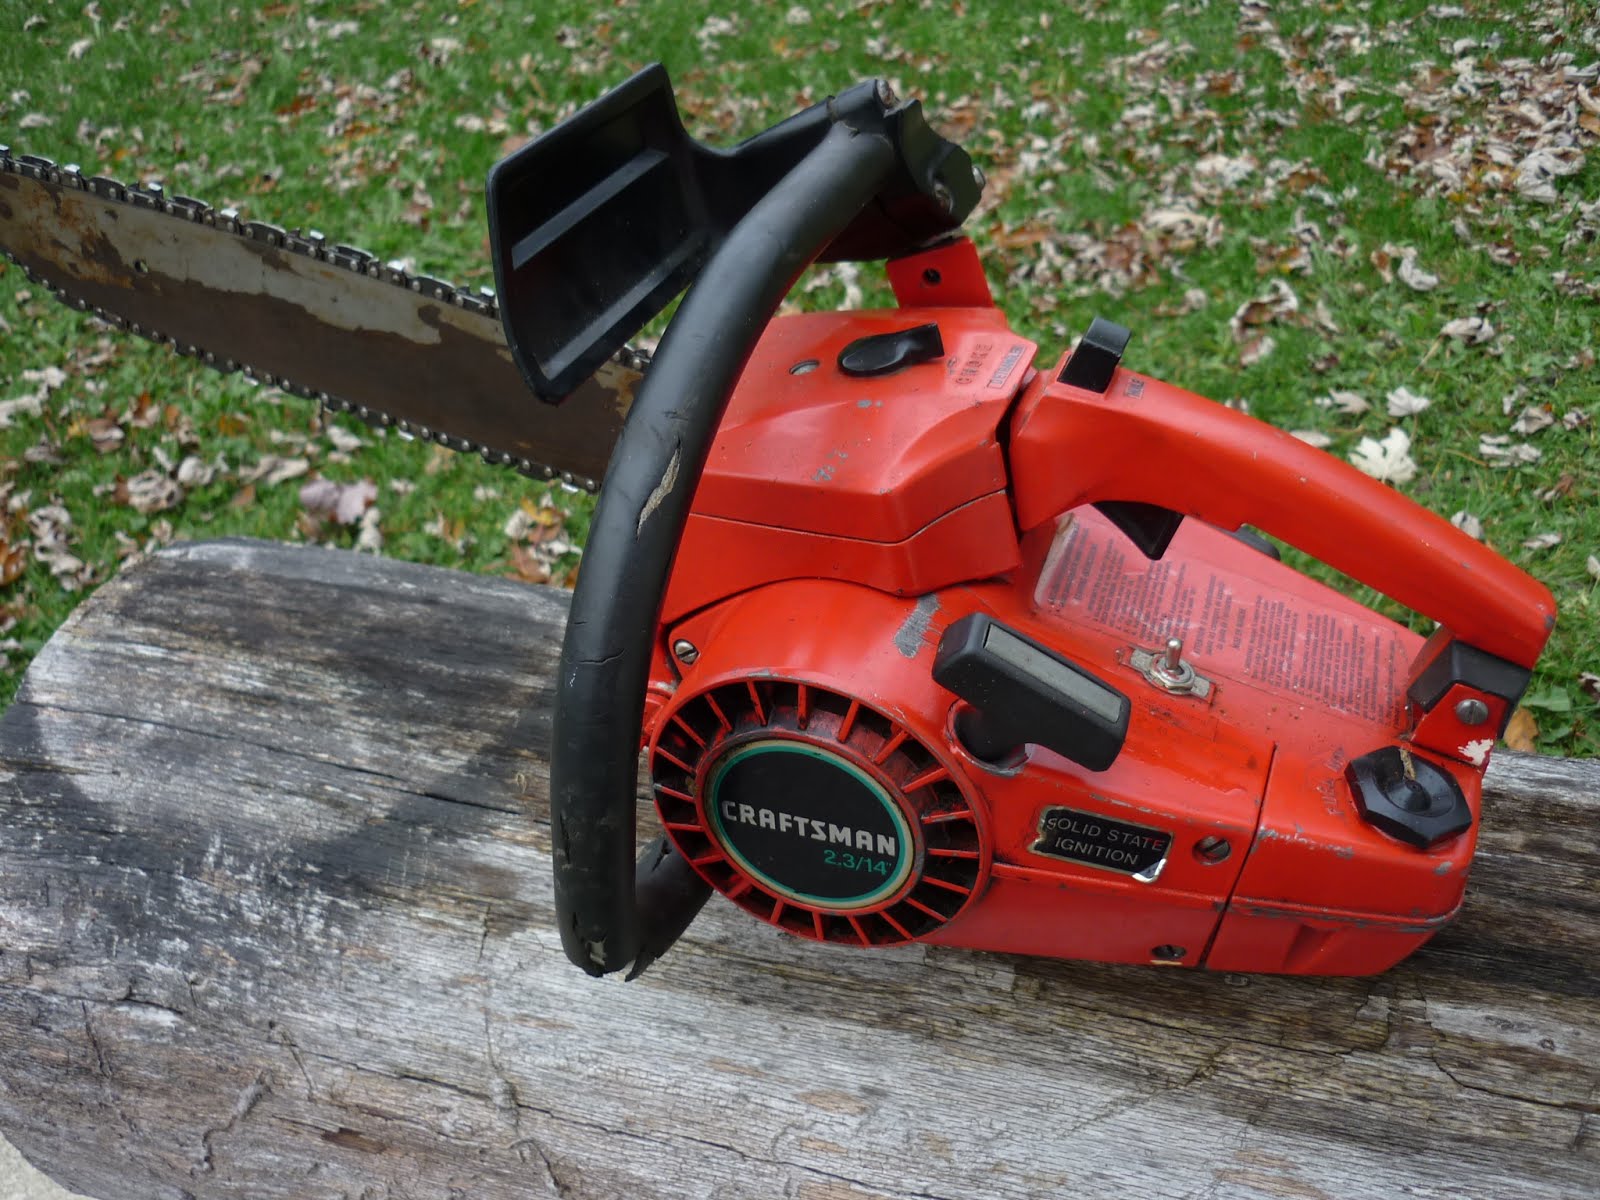 Who Makes Craftsman Chainsaw? Are They Any Good? (Nov. 2020)